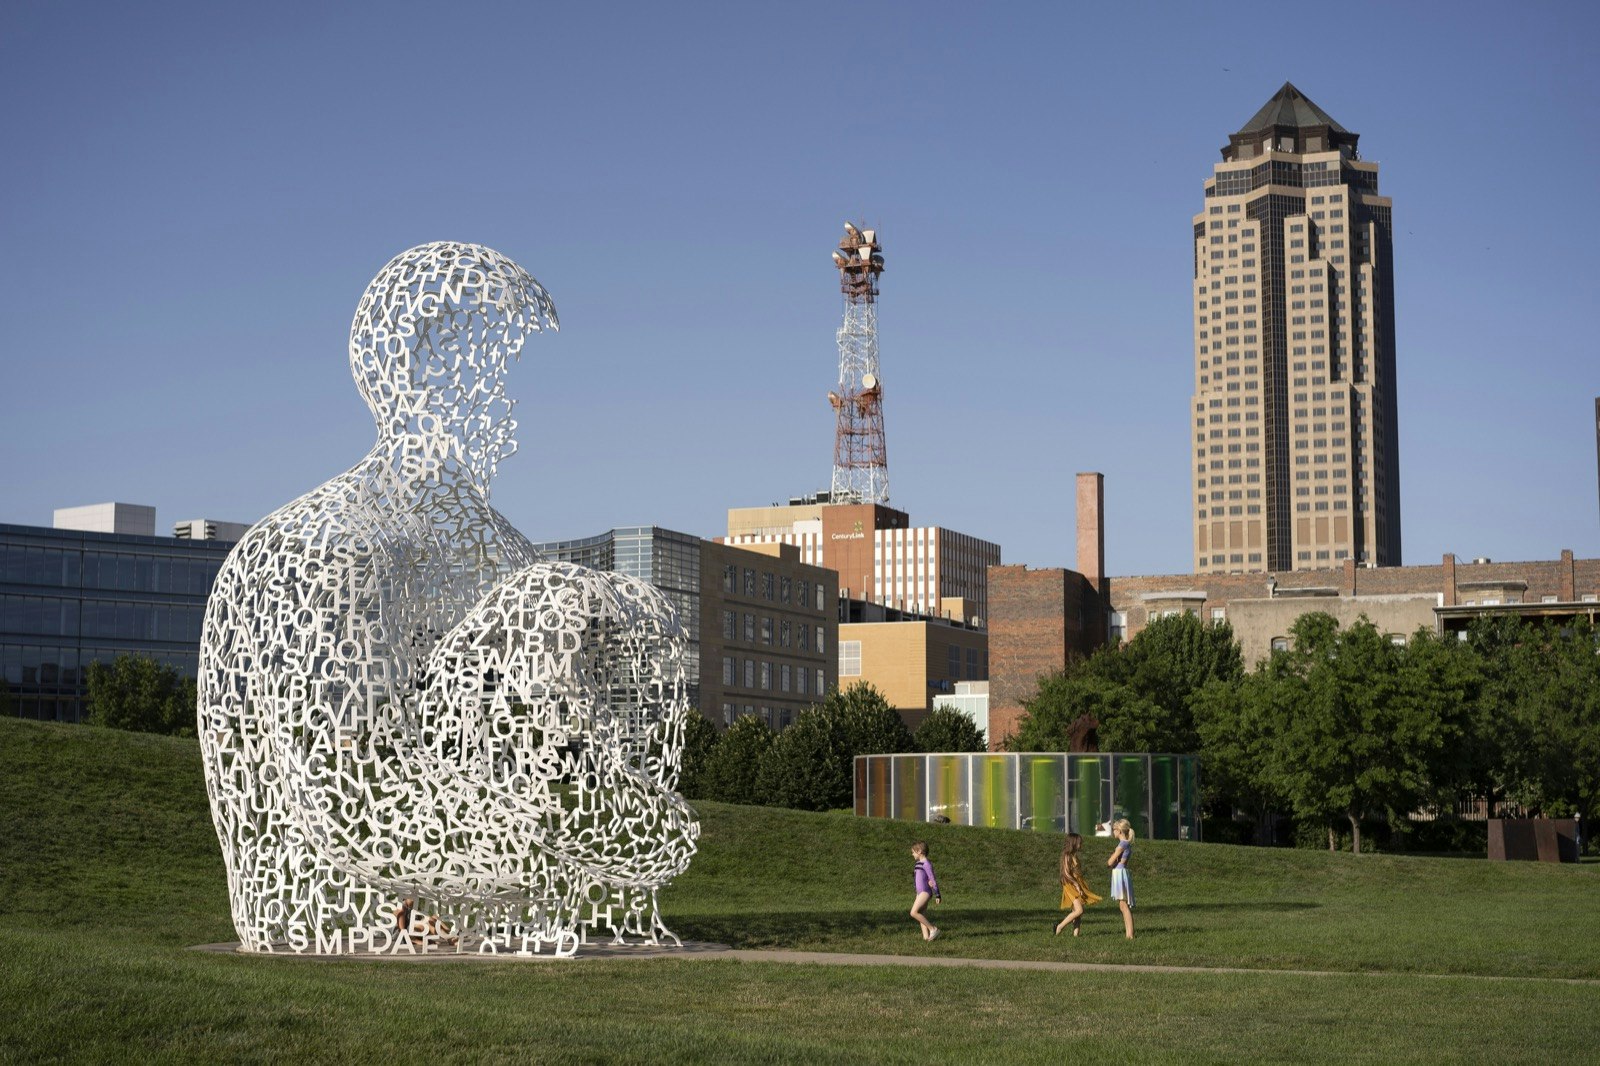 A massive sculpture of a man, made of white letters of the alphabet, sits in a park surrounded by a tall building and radio tower; Things to do in Des Moines during the Iowa Caucuses